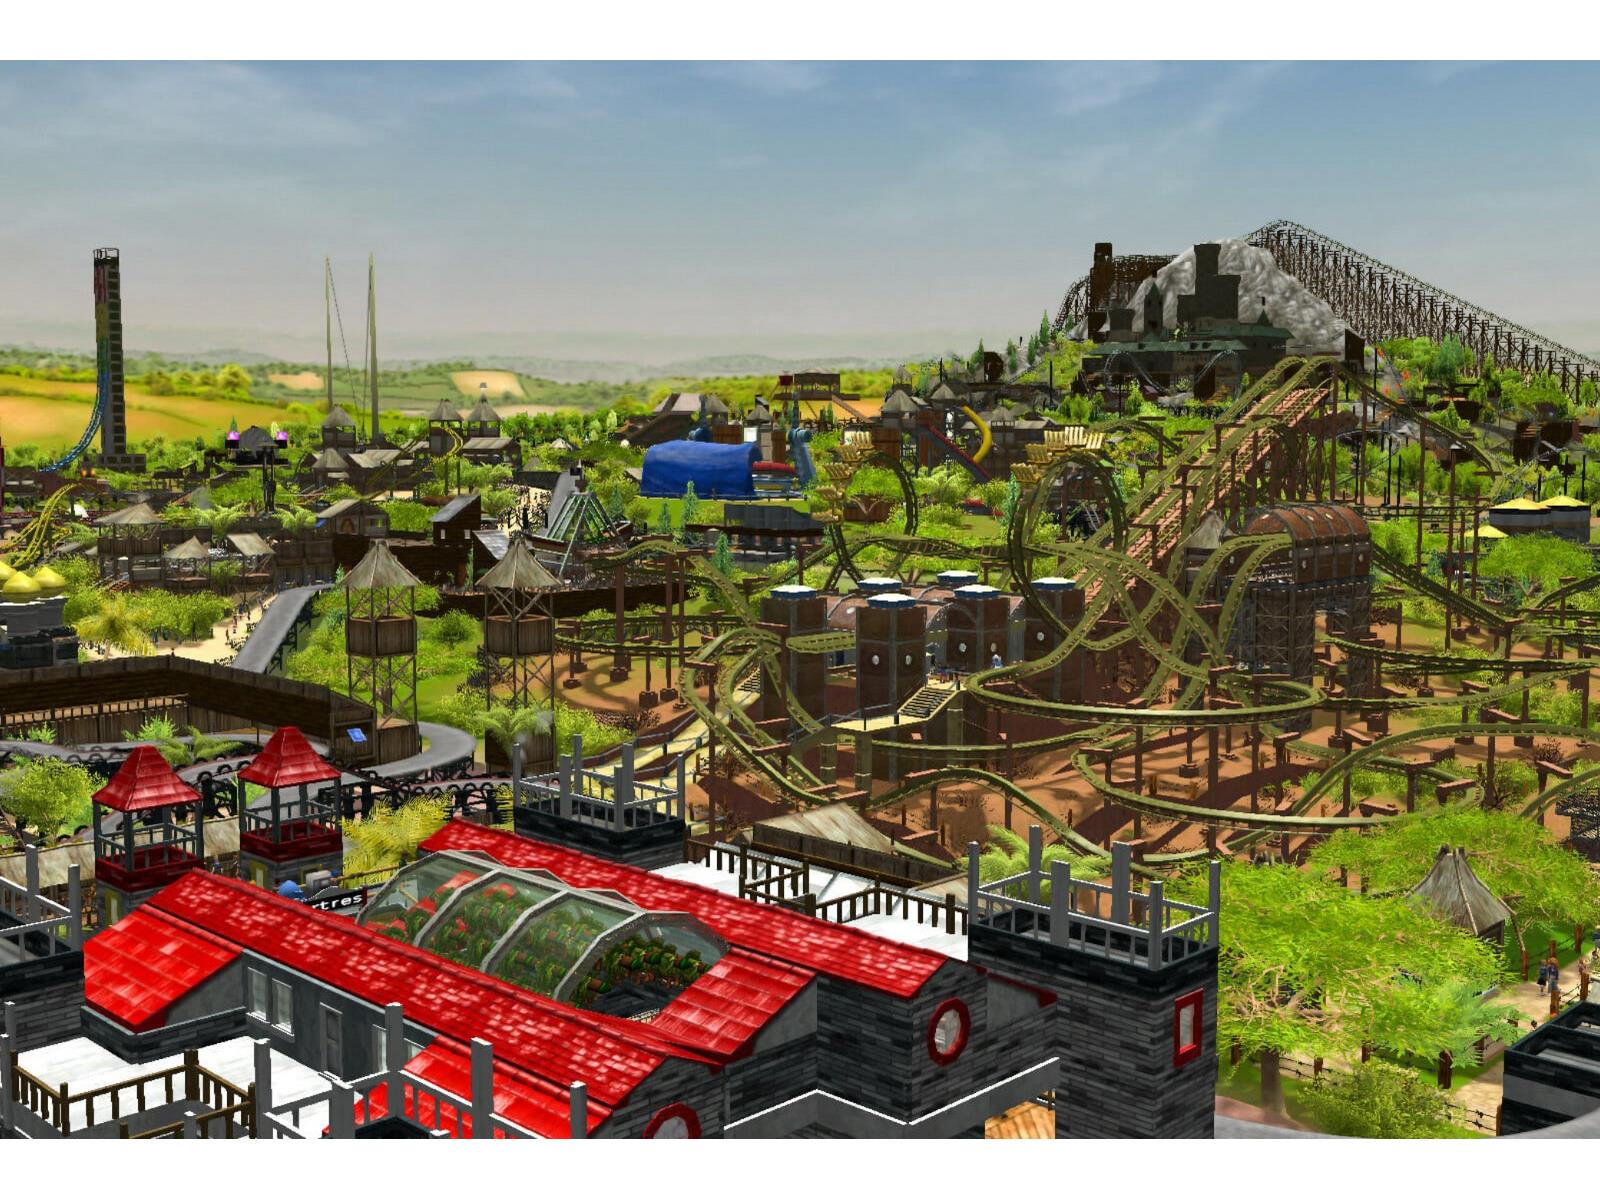 Get Rollercoaster Tycoon 3 For FREE If Downloaded by 4pm Oct, 1